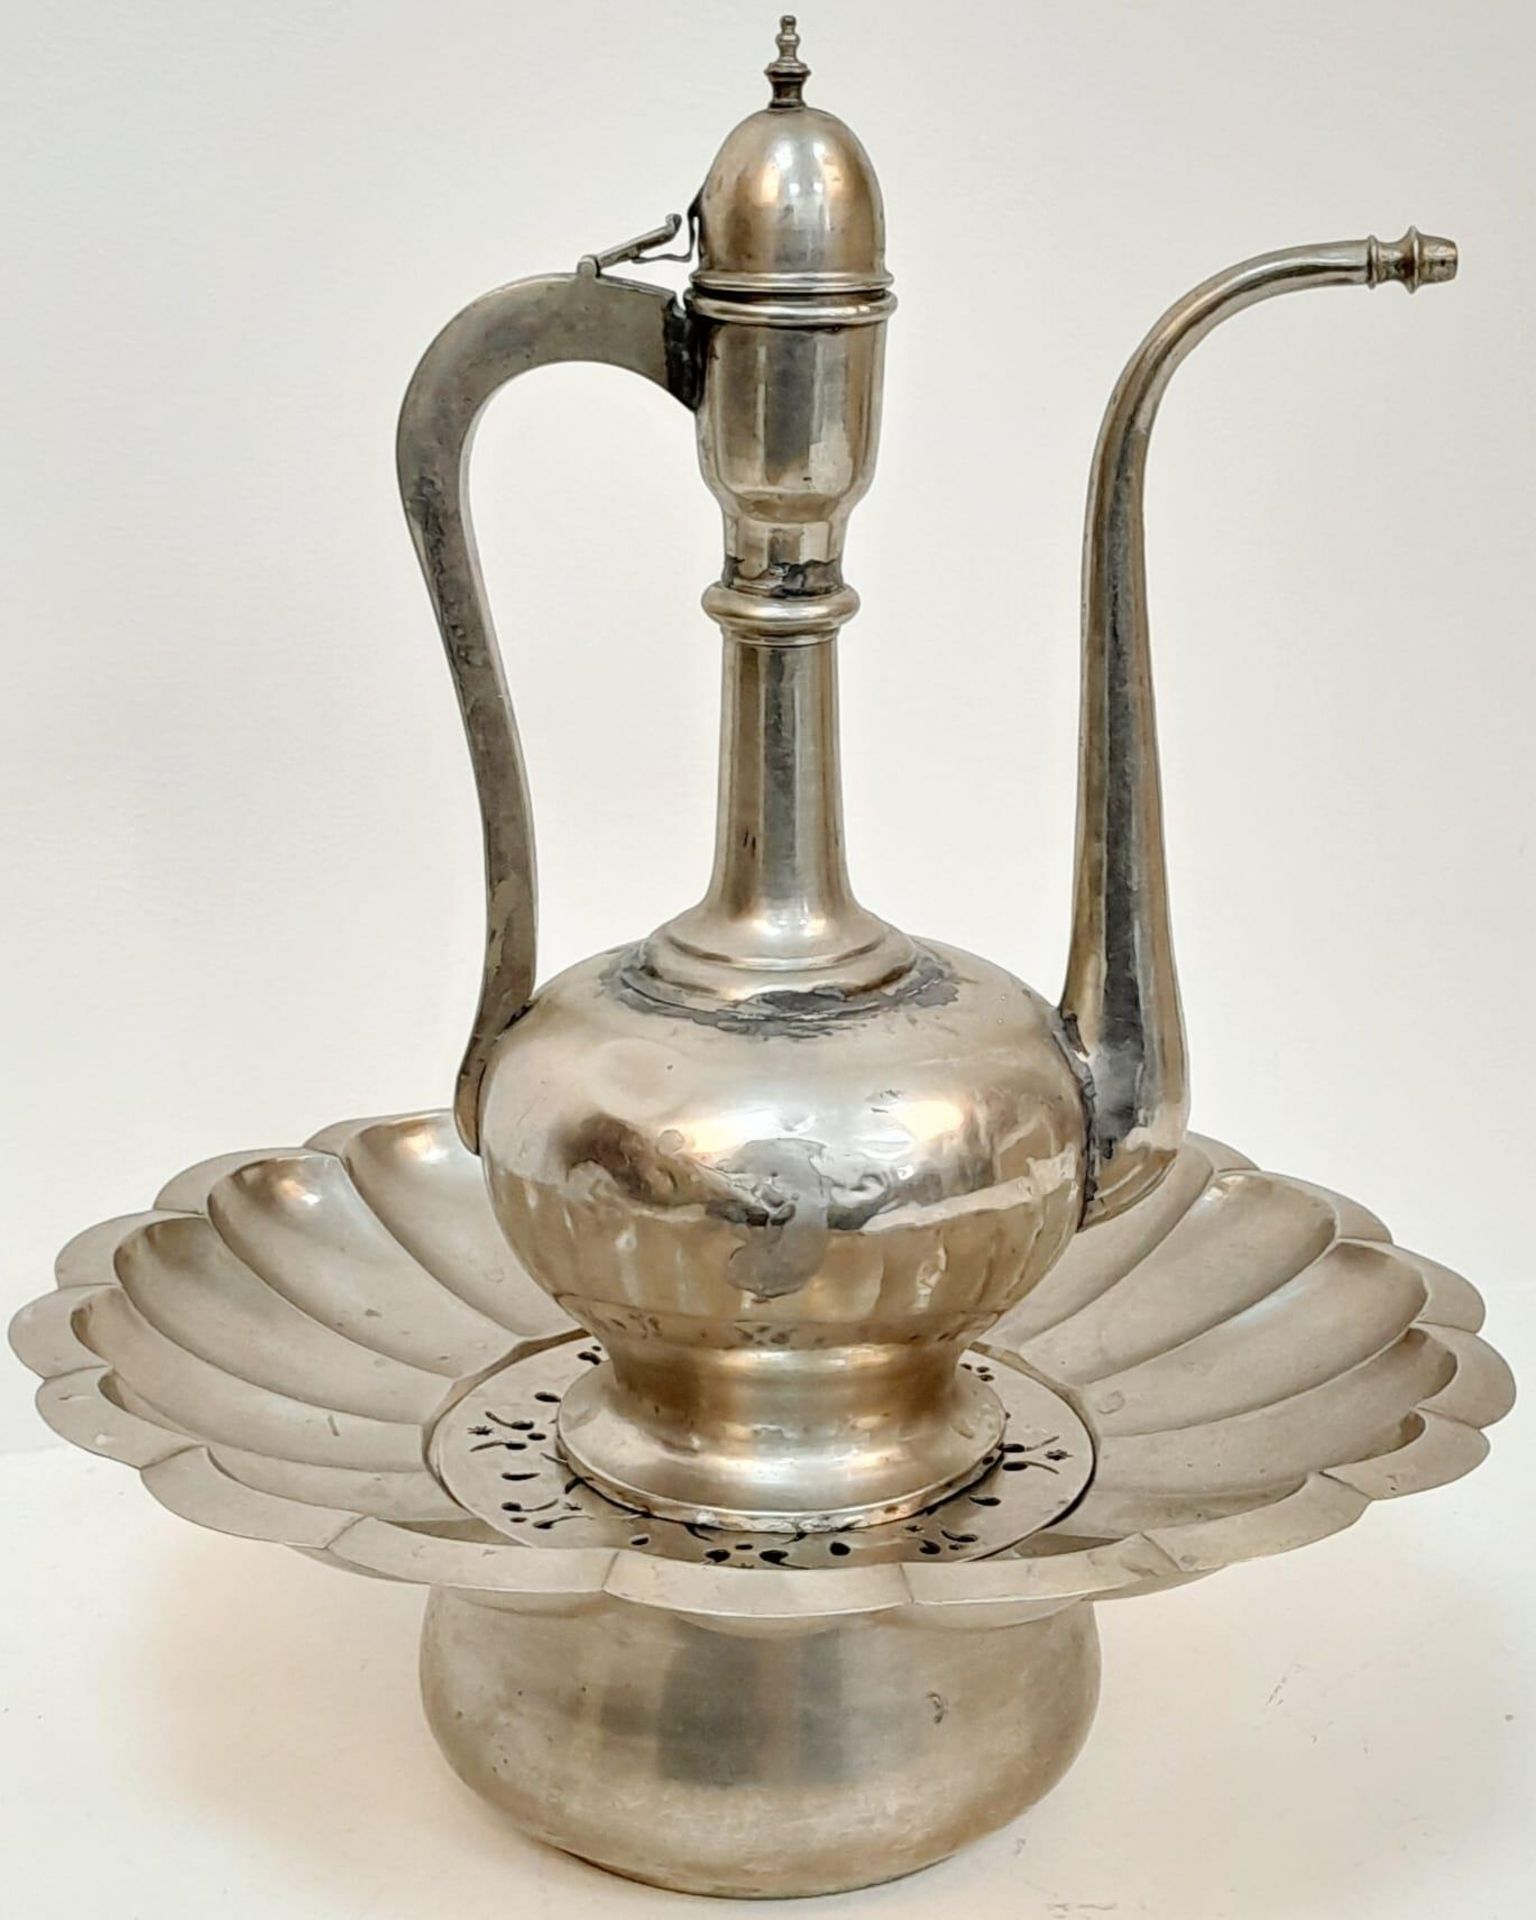 A MIDDLE EASTERN "EWER AND BASIN" .